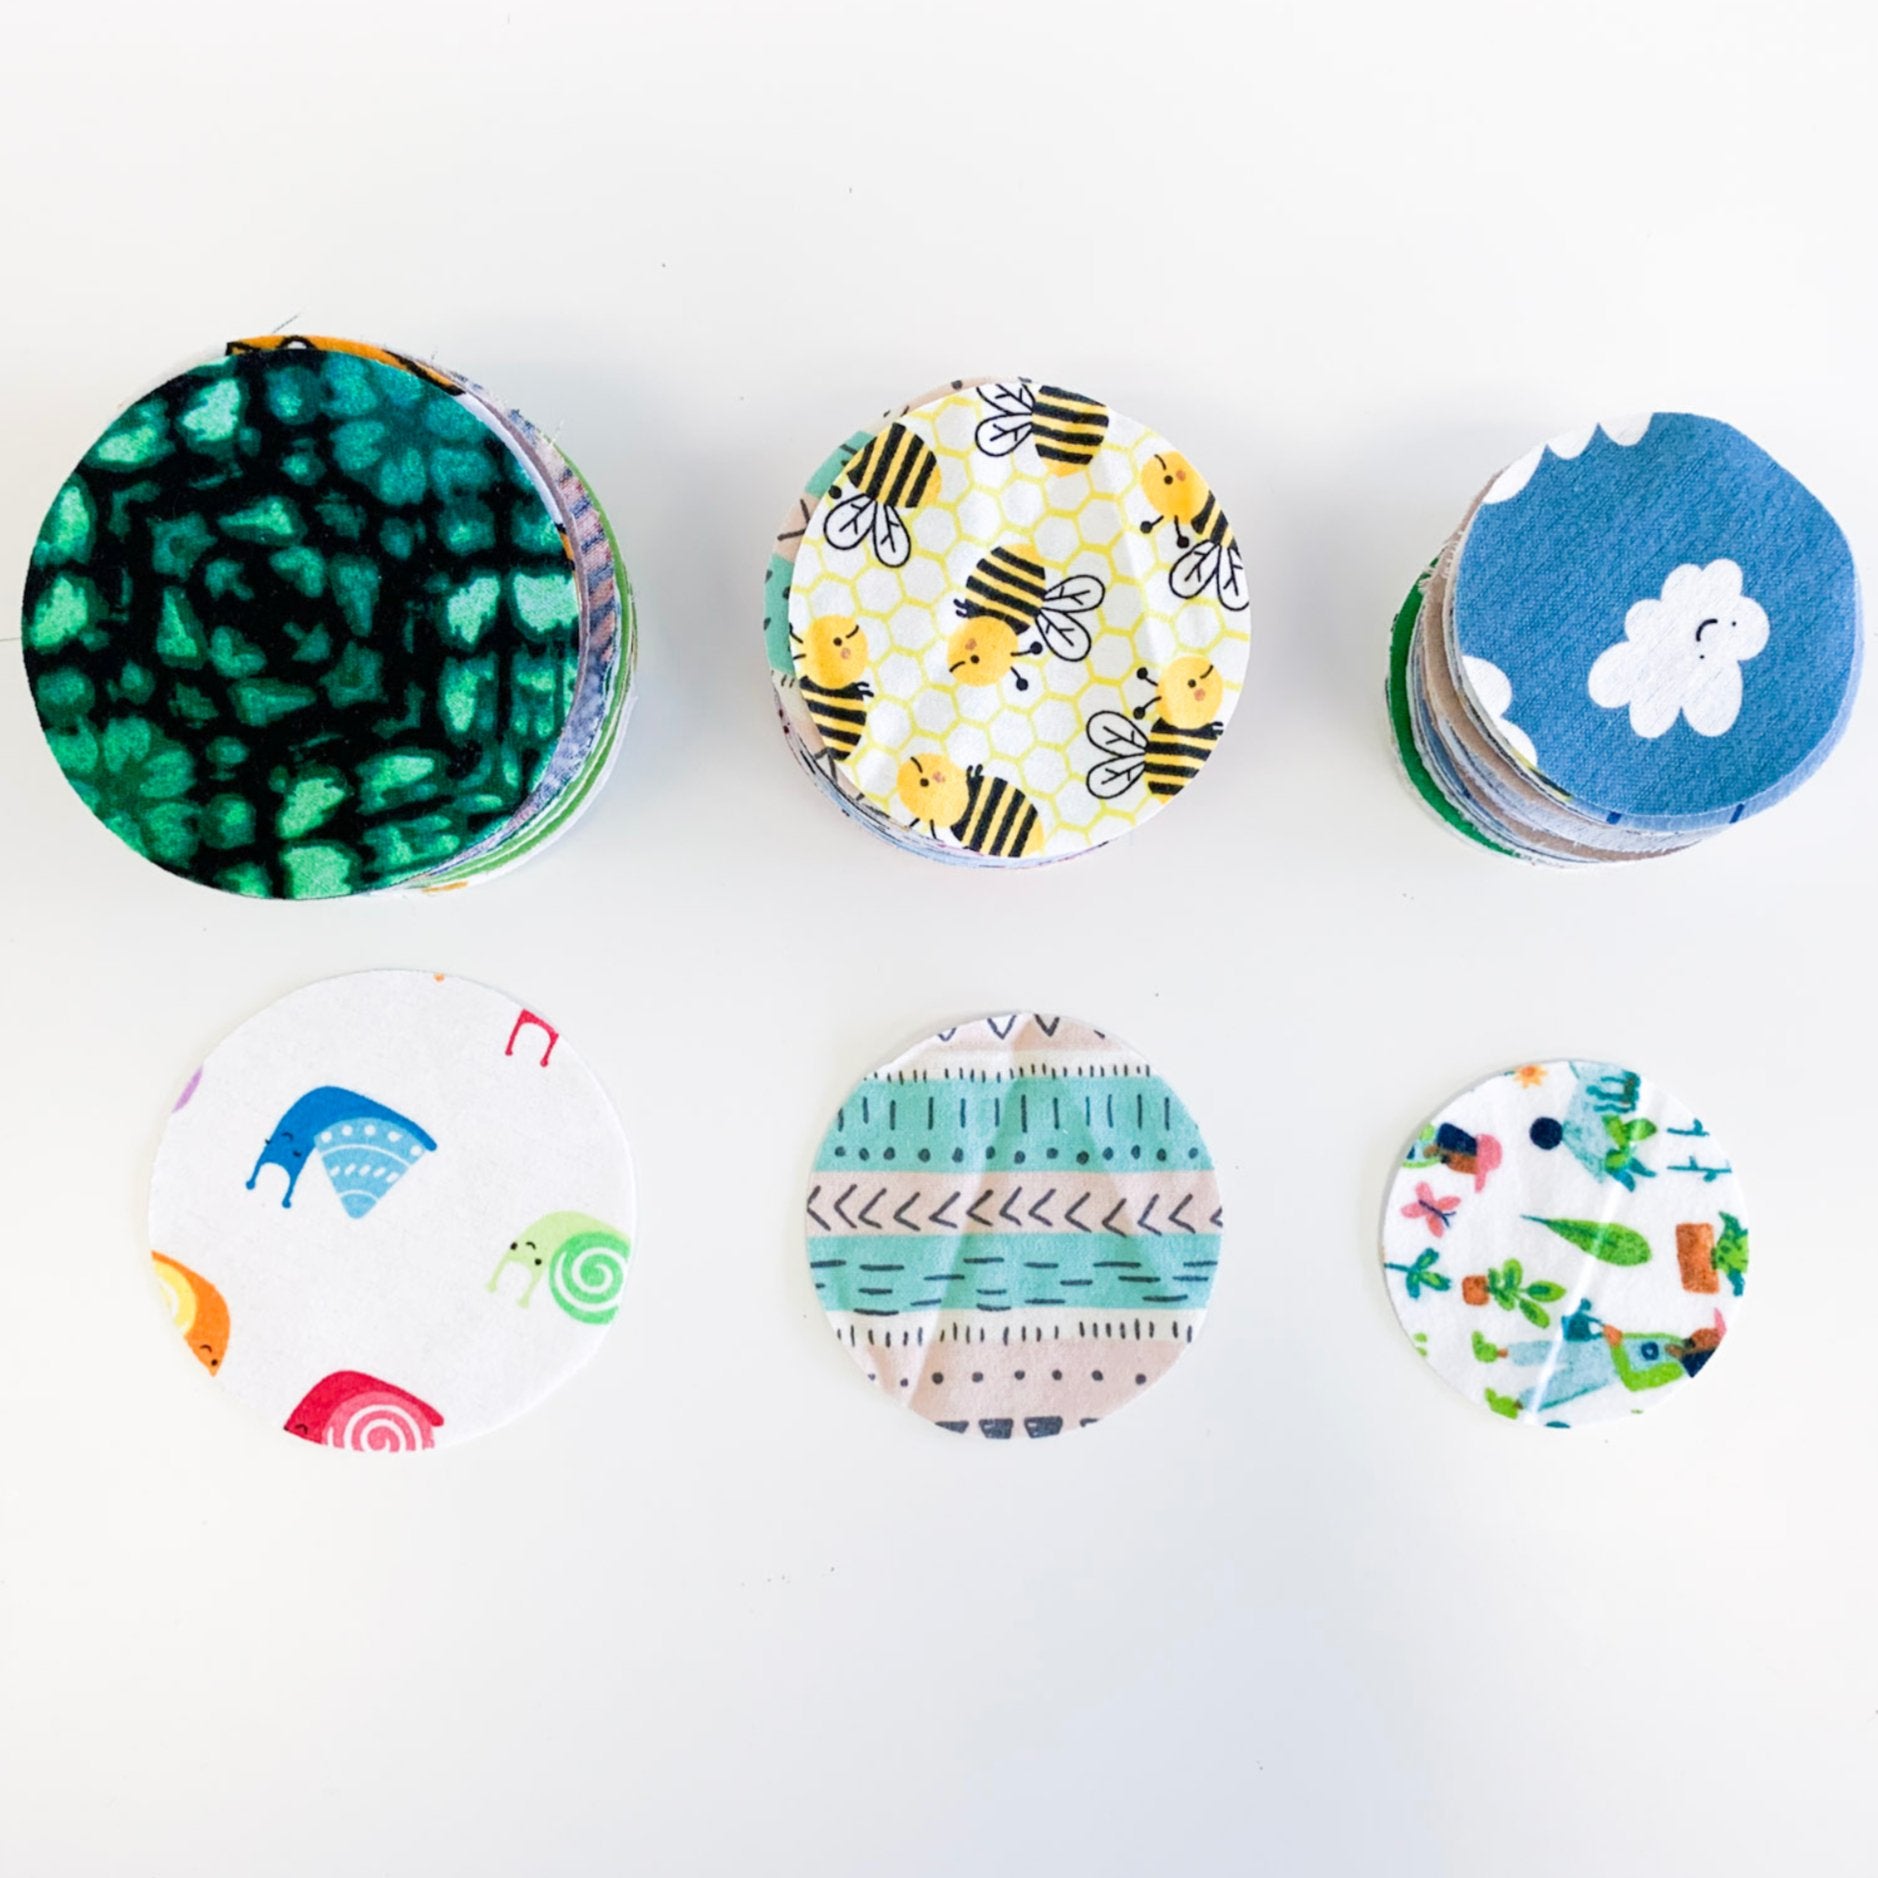 Fabric Scraps: Circles - Marley's Monsters